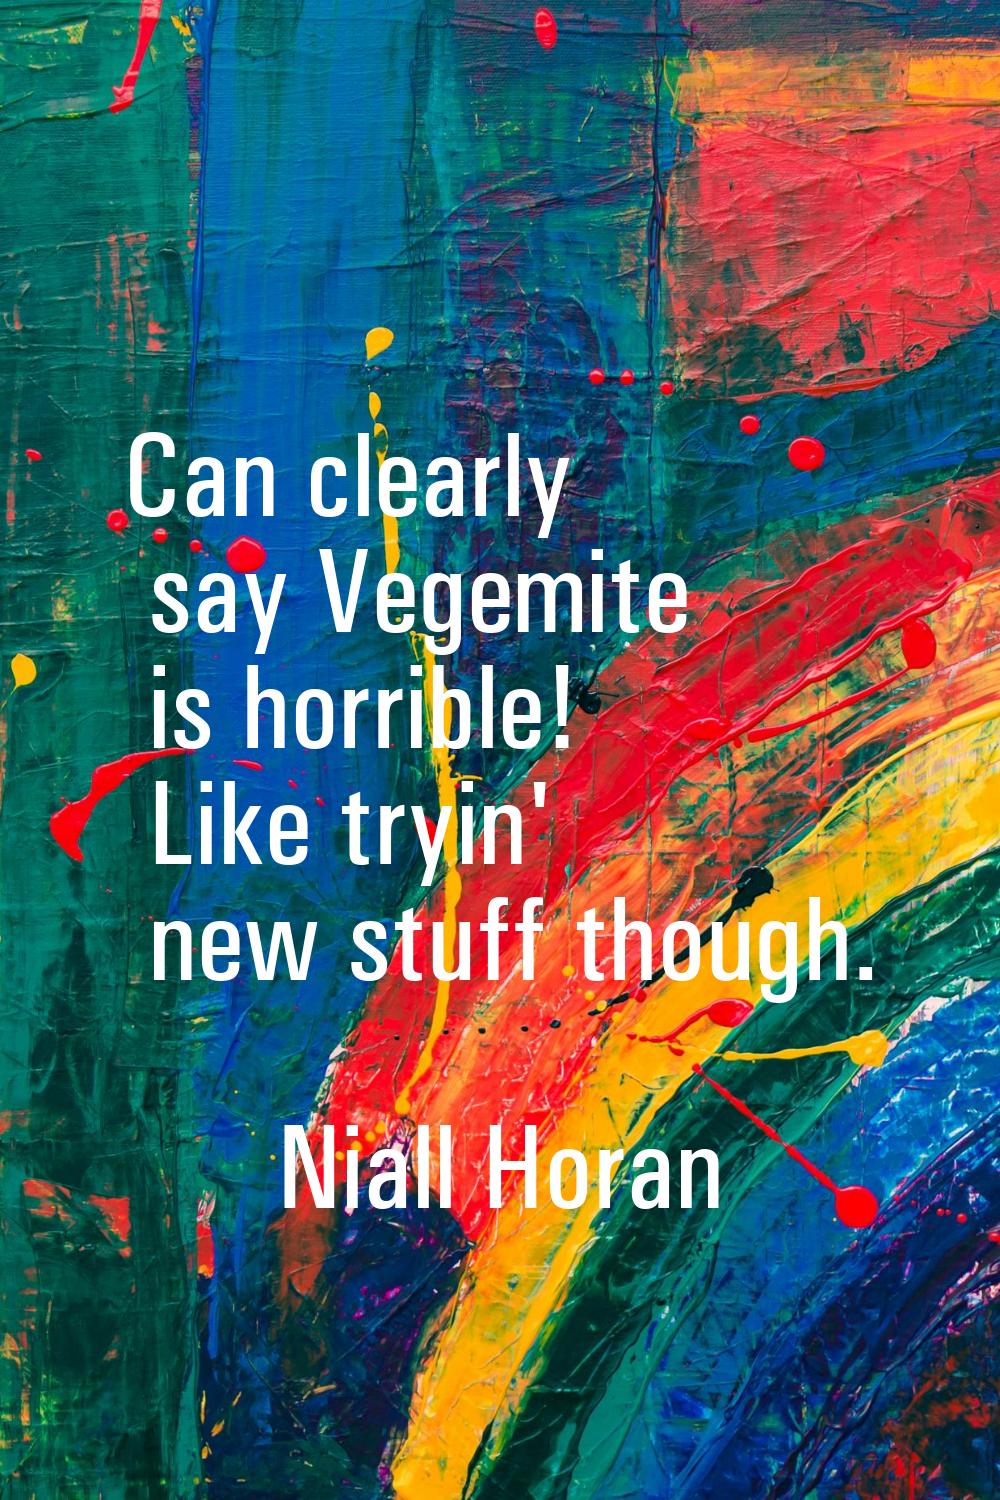 Can clearly say Vegemite is horrible! Like tryin' new stuff though.